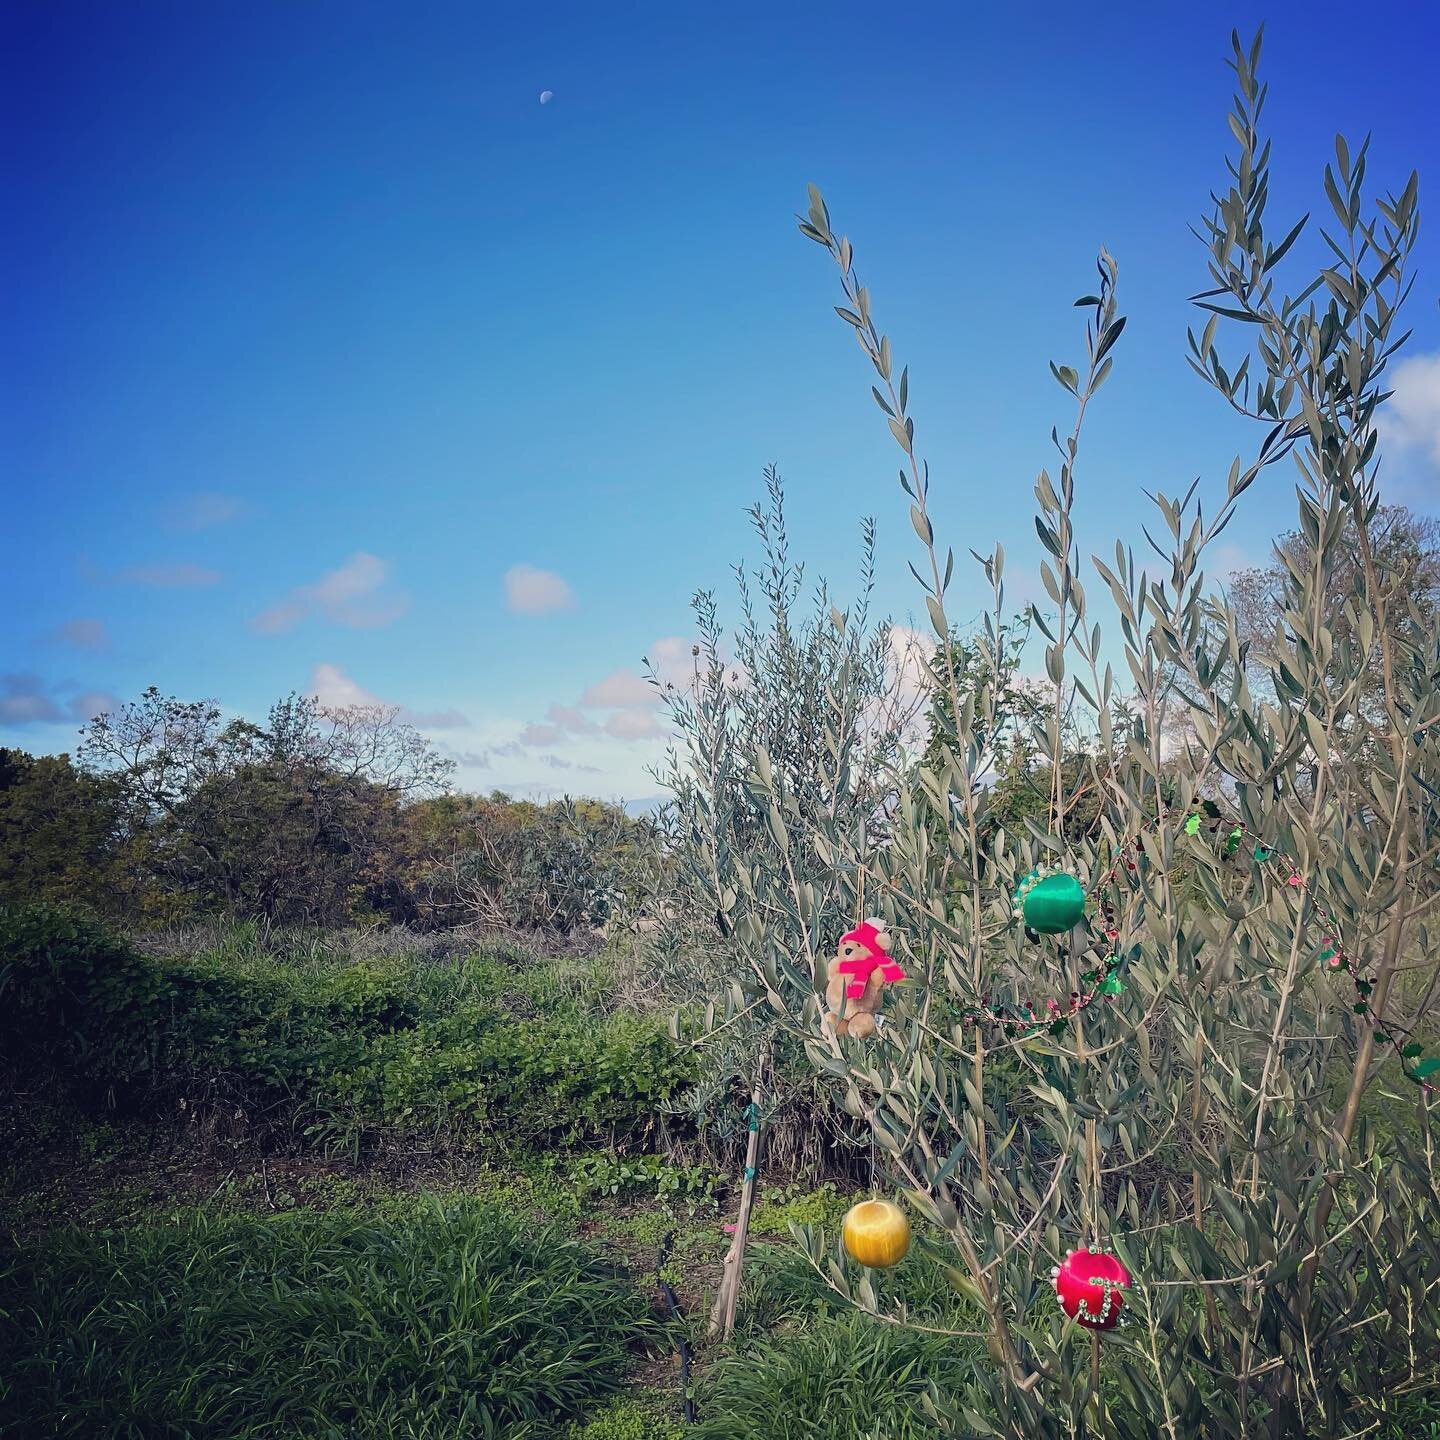 Happy holidays from the olive grove! 🎄🎄It&rsquo;s such a beautiful morning here with the trees, the birds, the sun and the moon 🌙.

Wishing you a wonderful weekend!

The PueoKea Family 👨&zwj;👩&zwj;👧&zwj;👦

#happyholidays #tistheseason #treedec